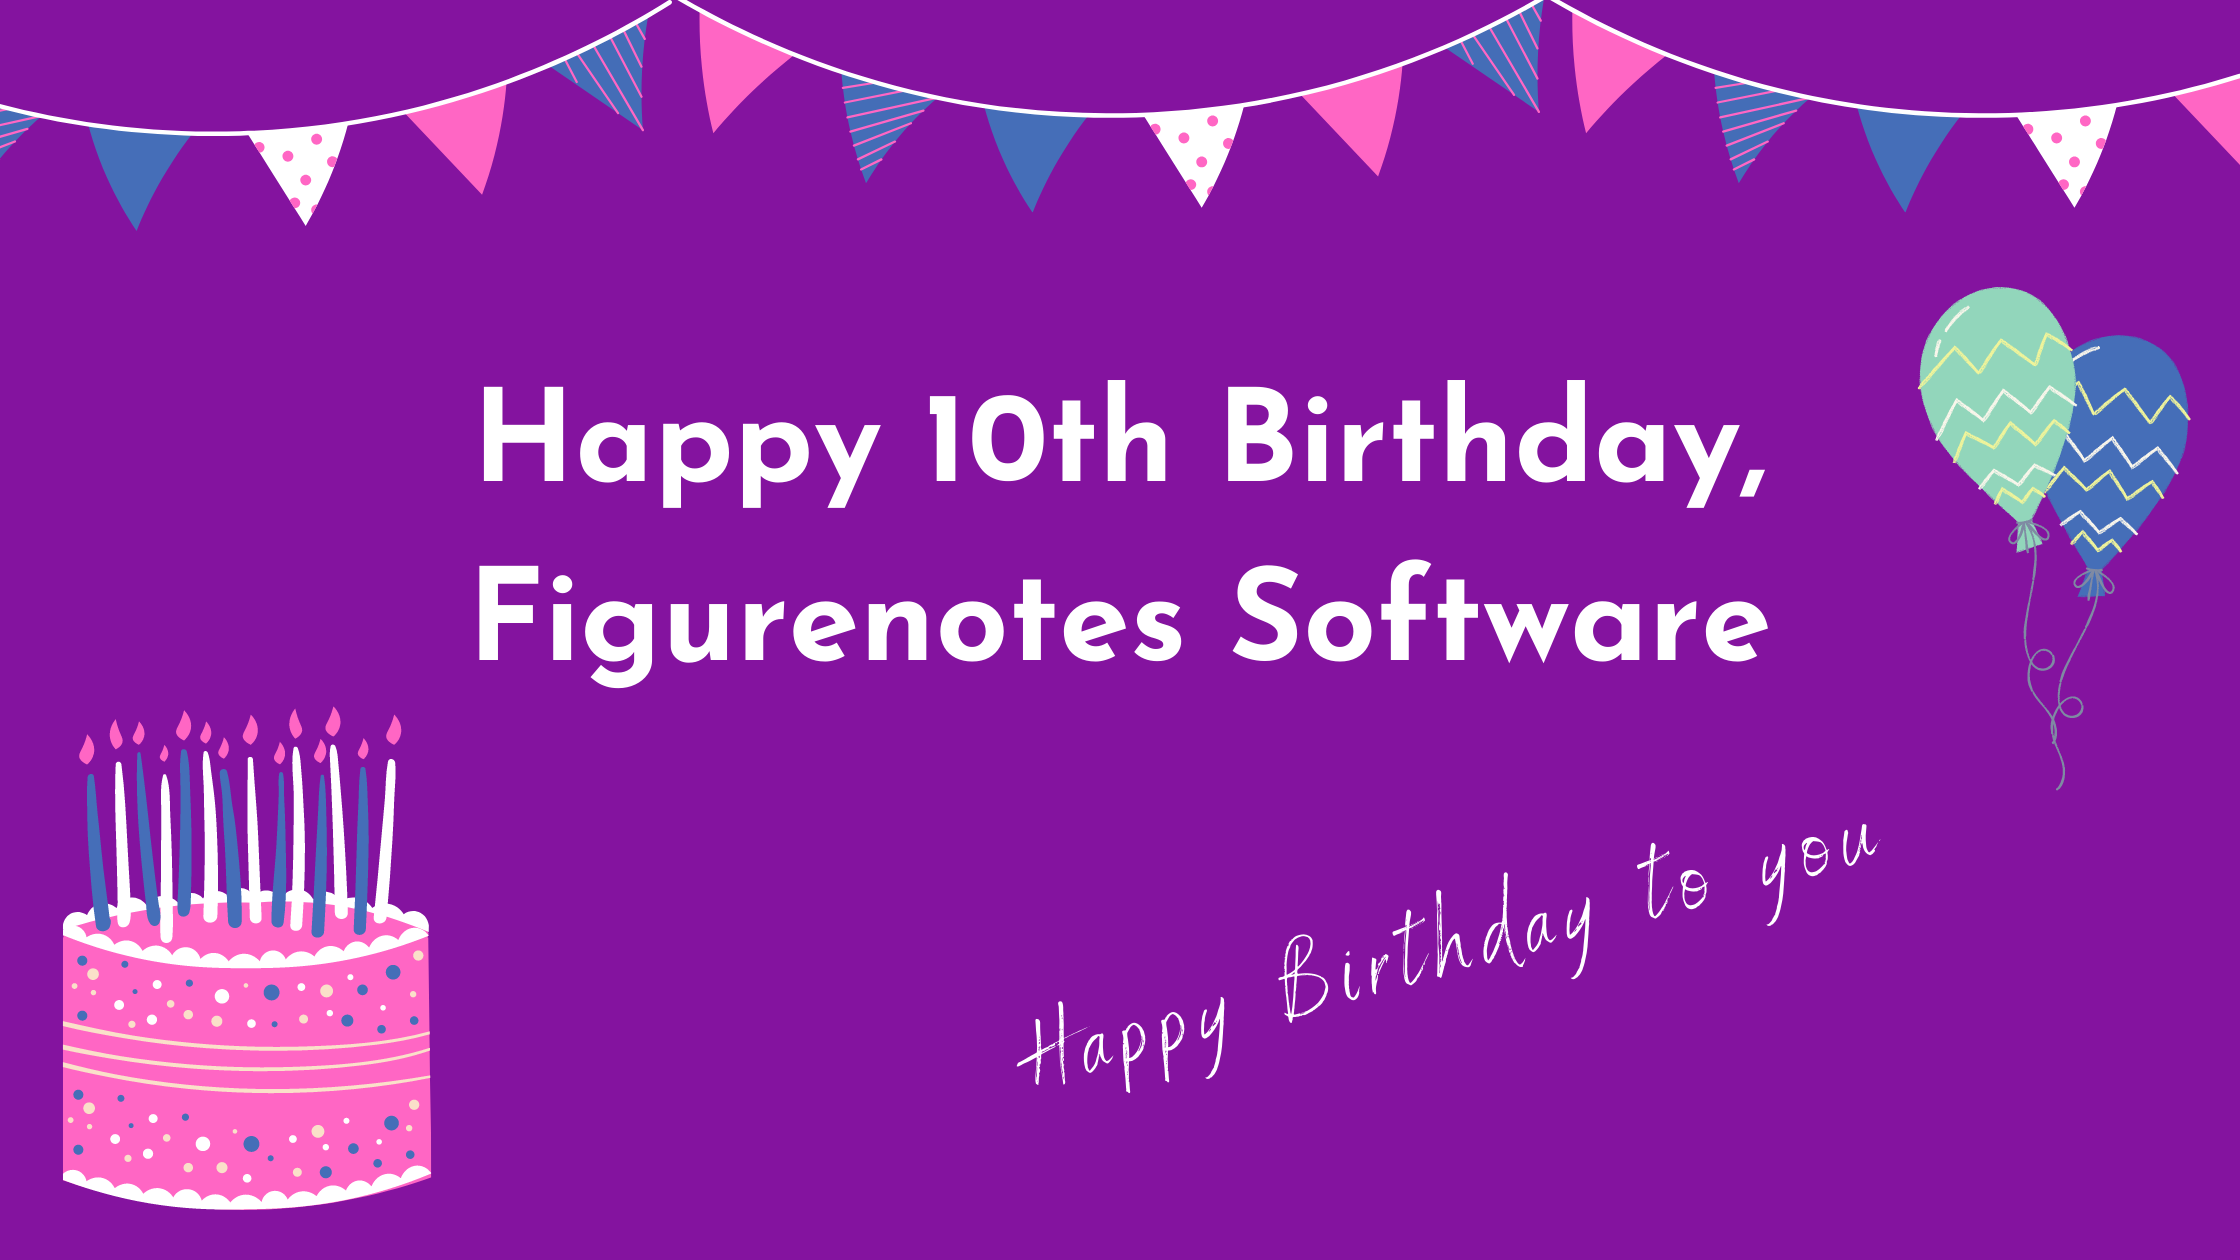 Purple background with bunting, birthday cake, and balloon cartoons. Text reads 'happy 10th birthday, figurenotes software'